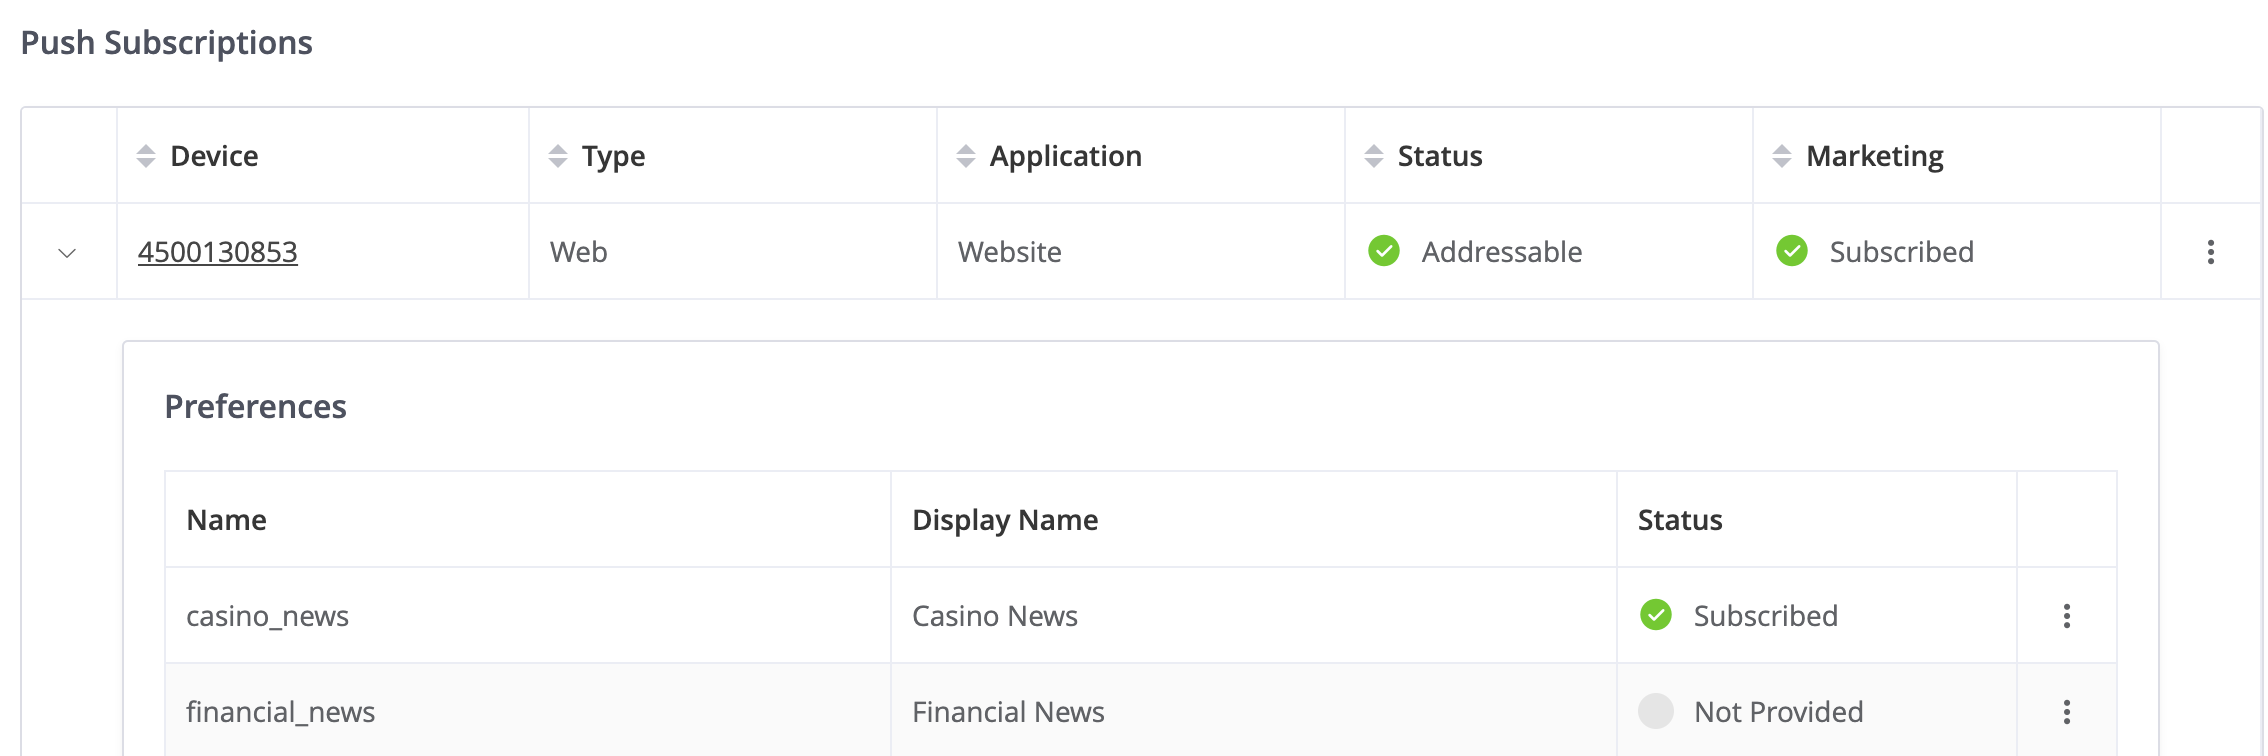 This web device is subscribed to 'Casino news'. They haven't stated whether they would like to be subscribed to 'Financial News'. 